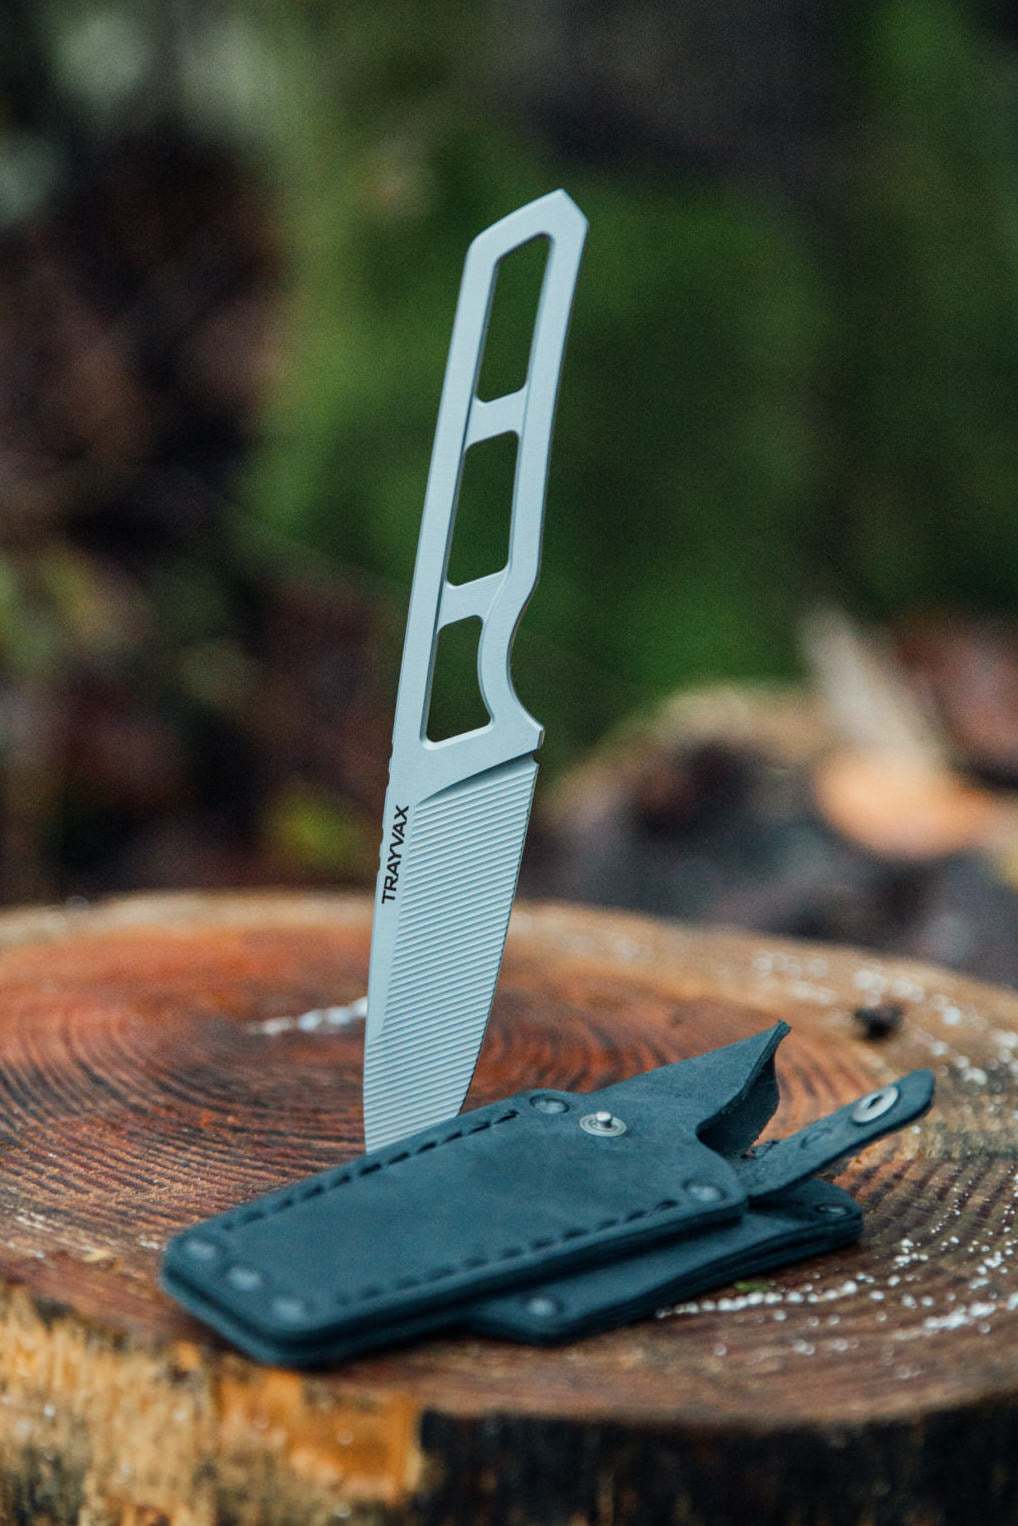 Sharp and Strong:The Importance of Choosing the Best Knife Steel